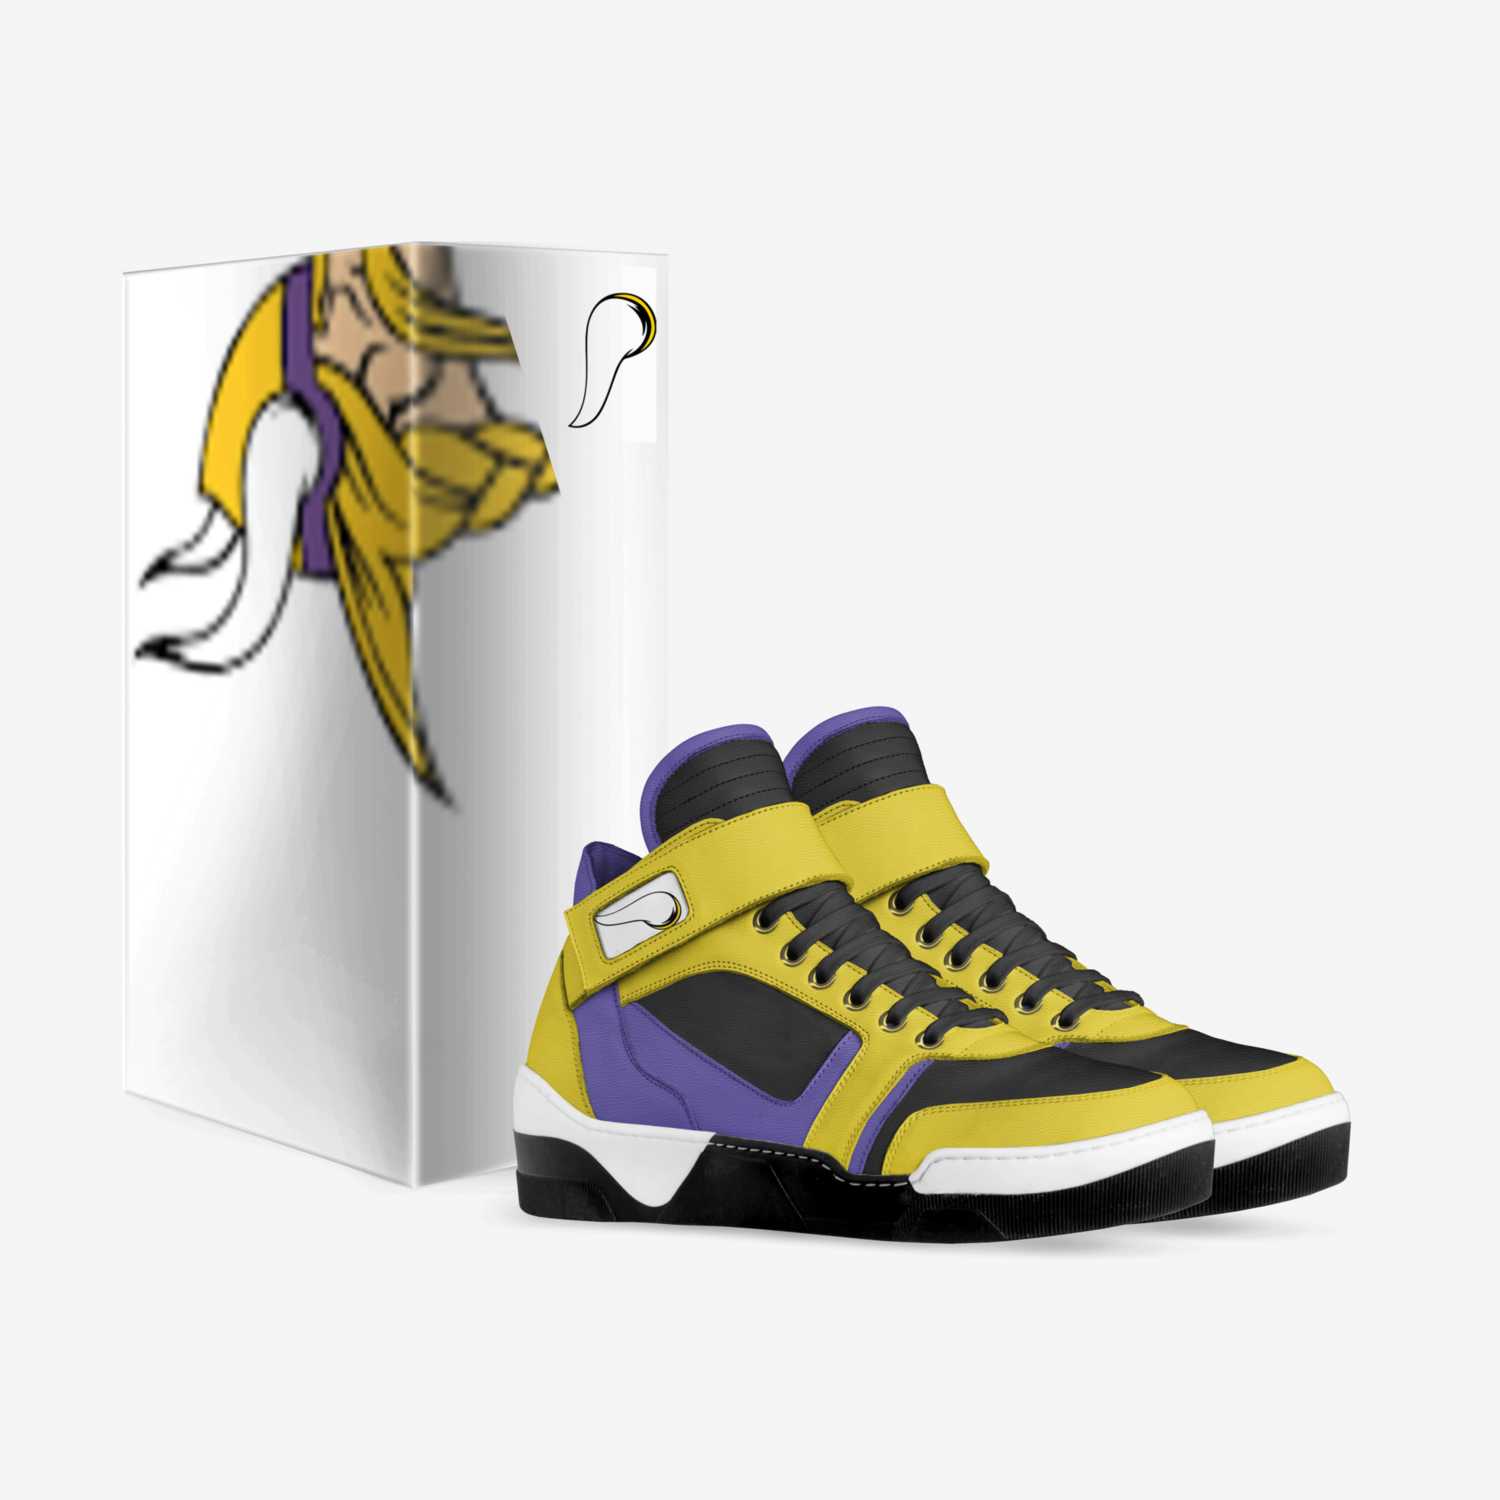 Steffl Elites custom made in Italy shoes by Noah Steffl | Box view